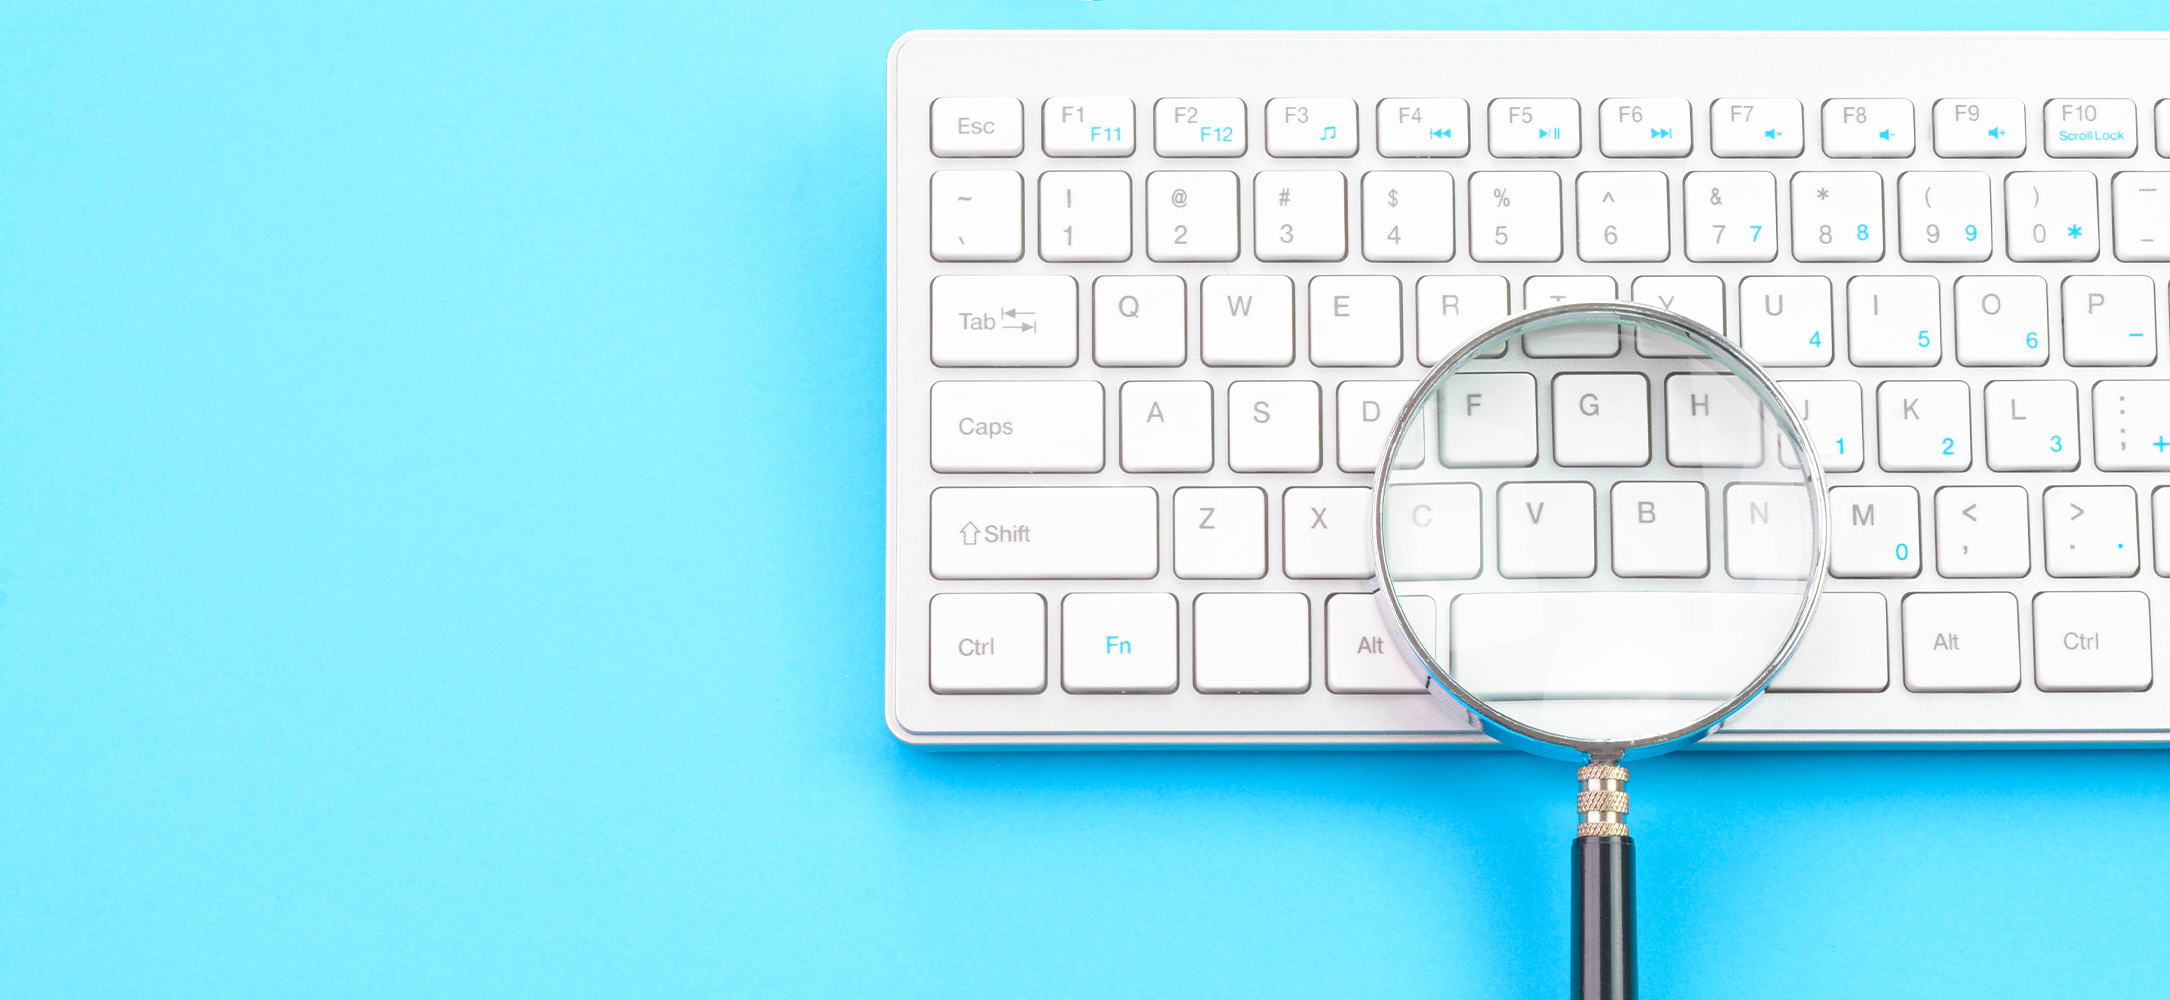 Magnifying Glass on Keyboard